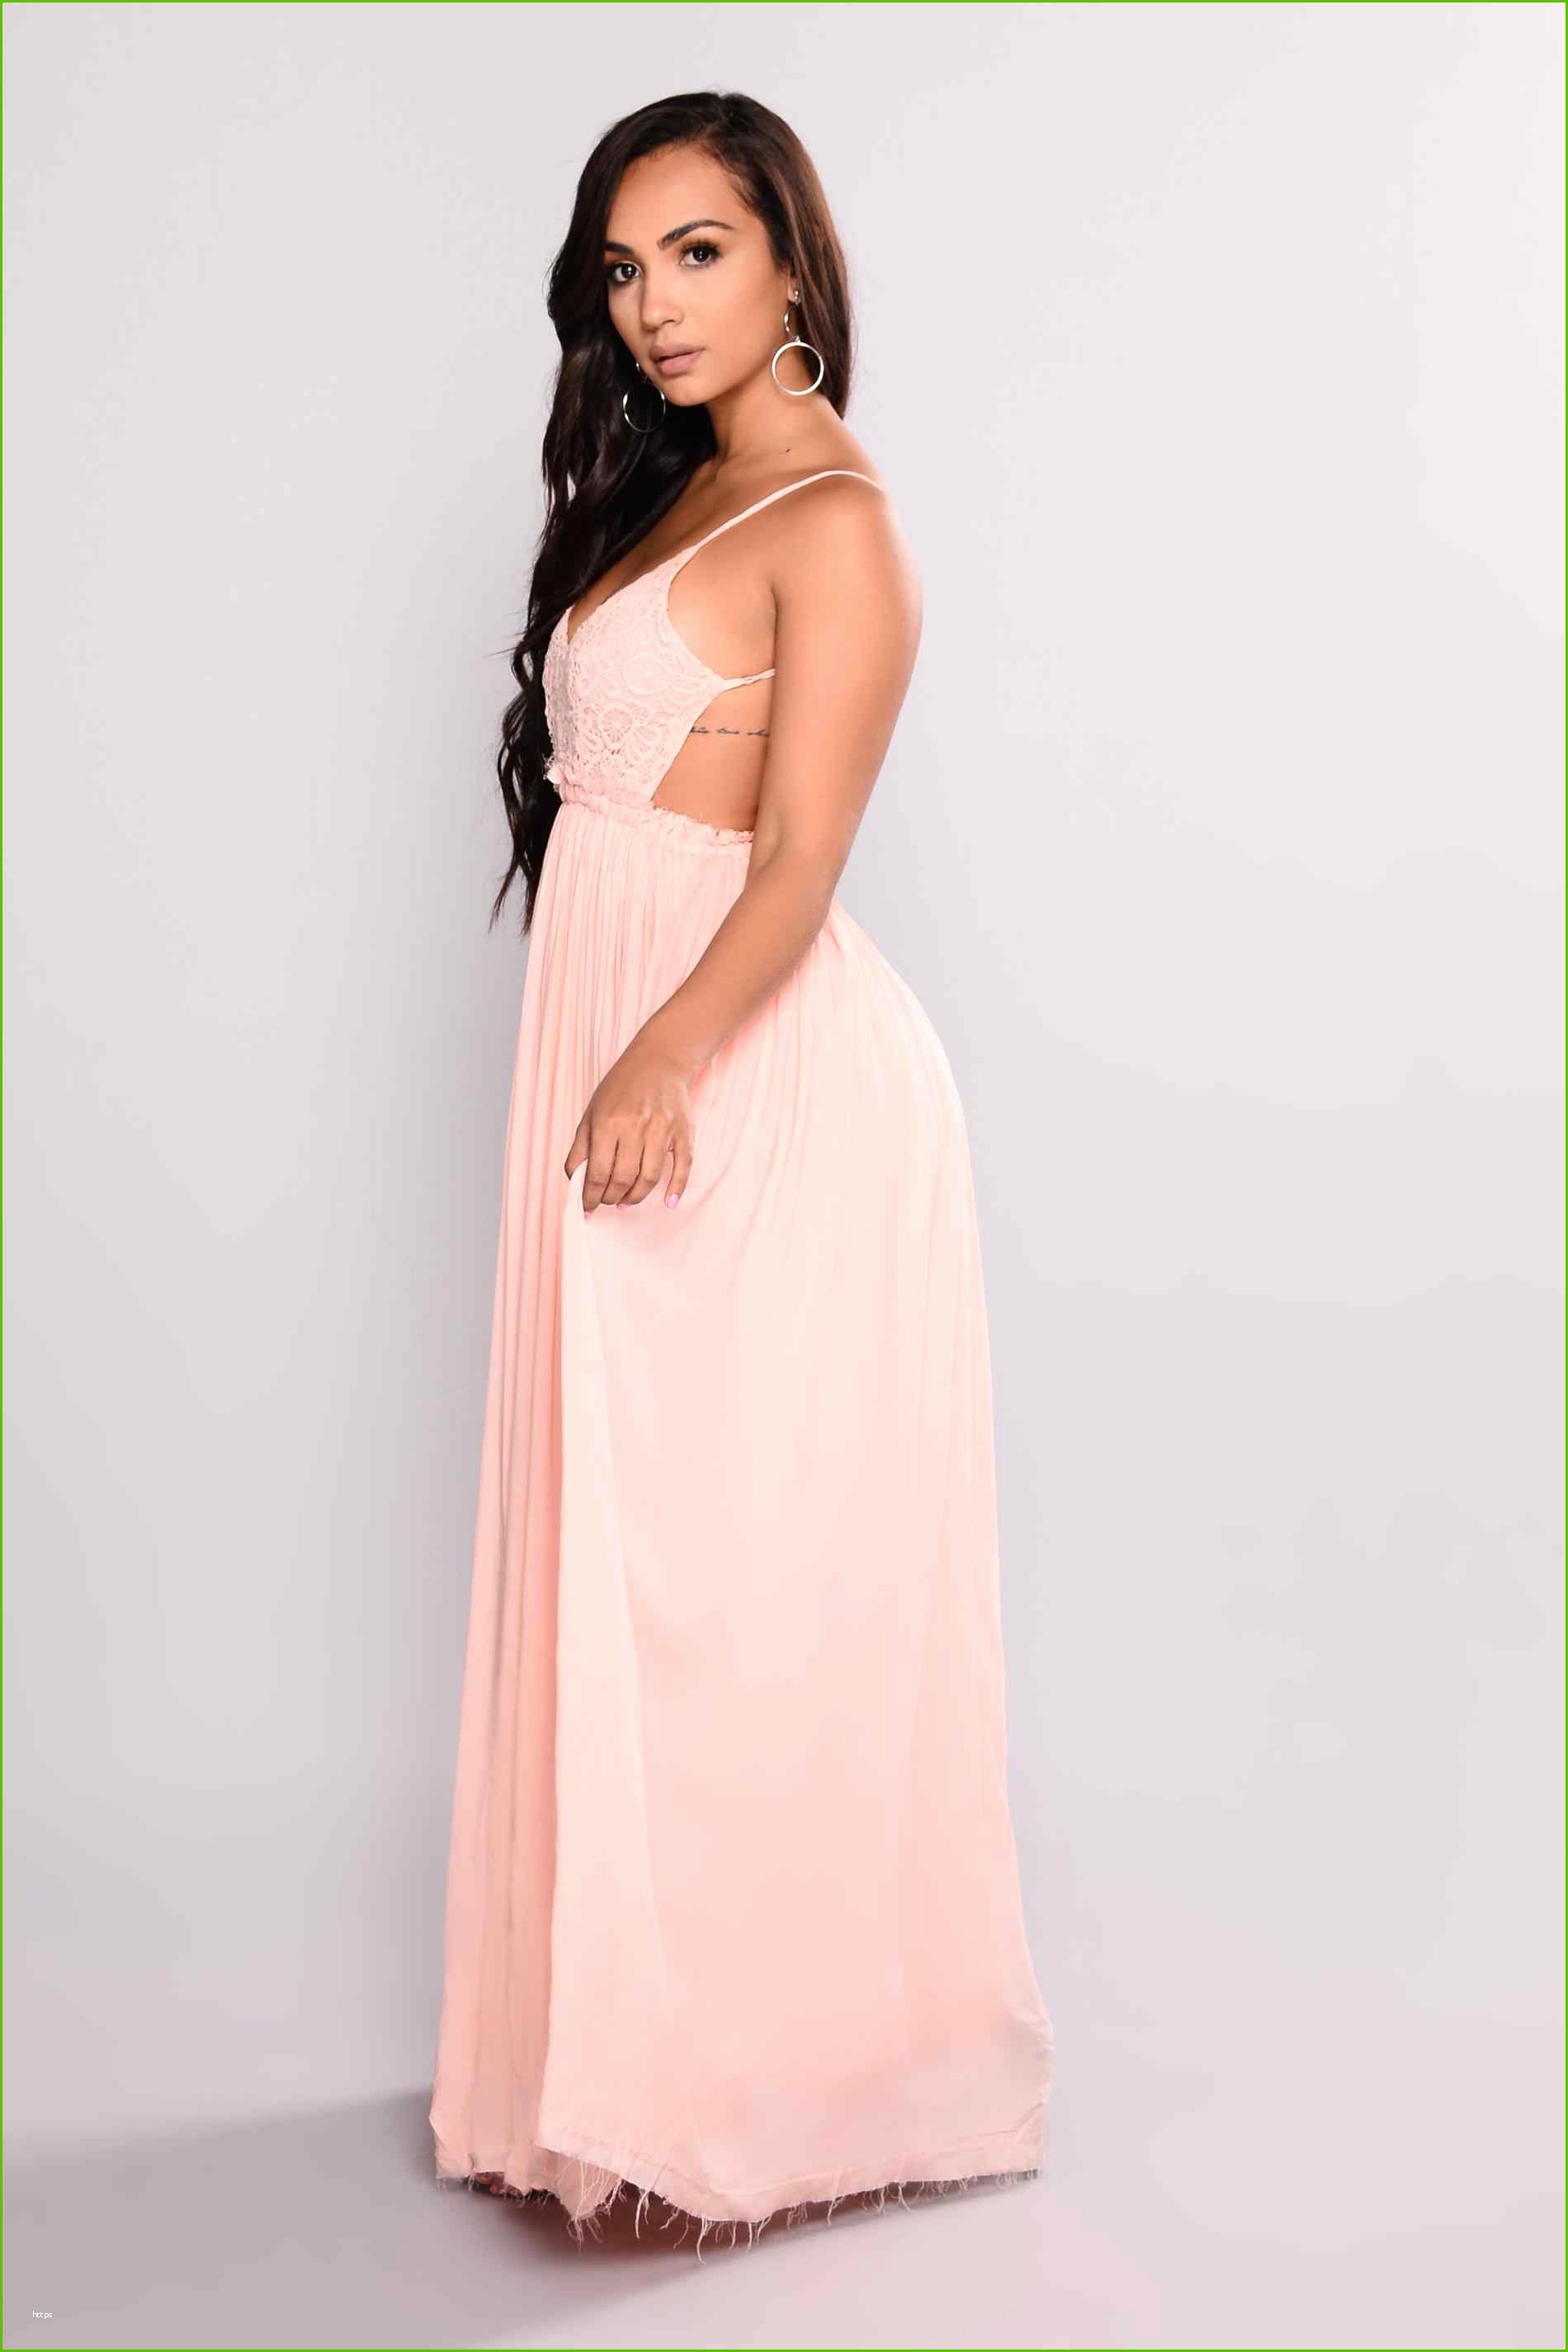 Full Size of Baby Shower:sturdy Stylish Maternity Dresses For Baby Shower Picture Ideas Stylish Maternity Dresses For Baby Shower As Well As Mesa Baby Shower With Baby Shower Table Ideas Plus Baby Shower Wishes Together With Baby Shower Party Favors